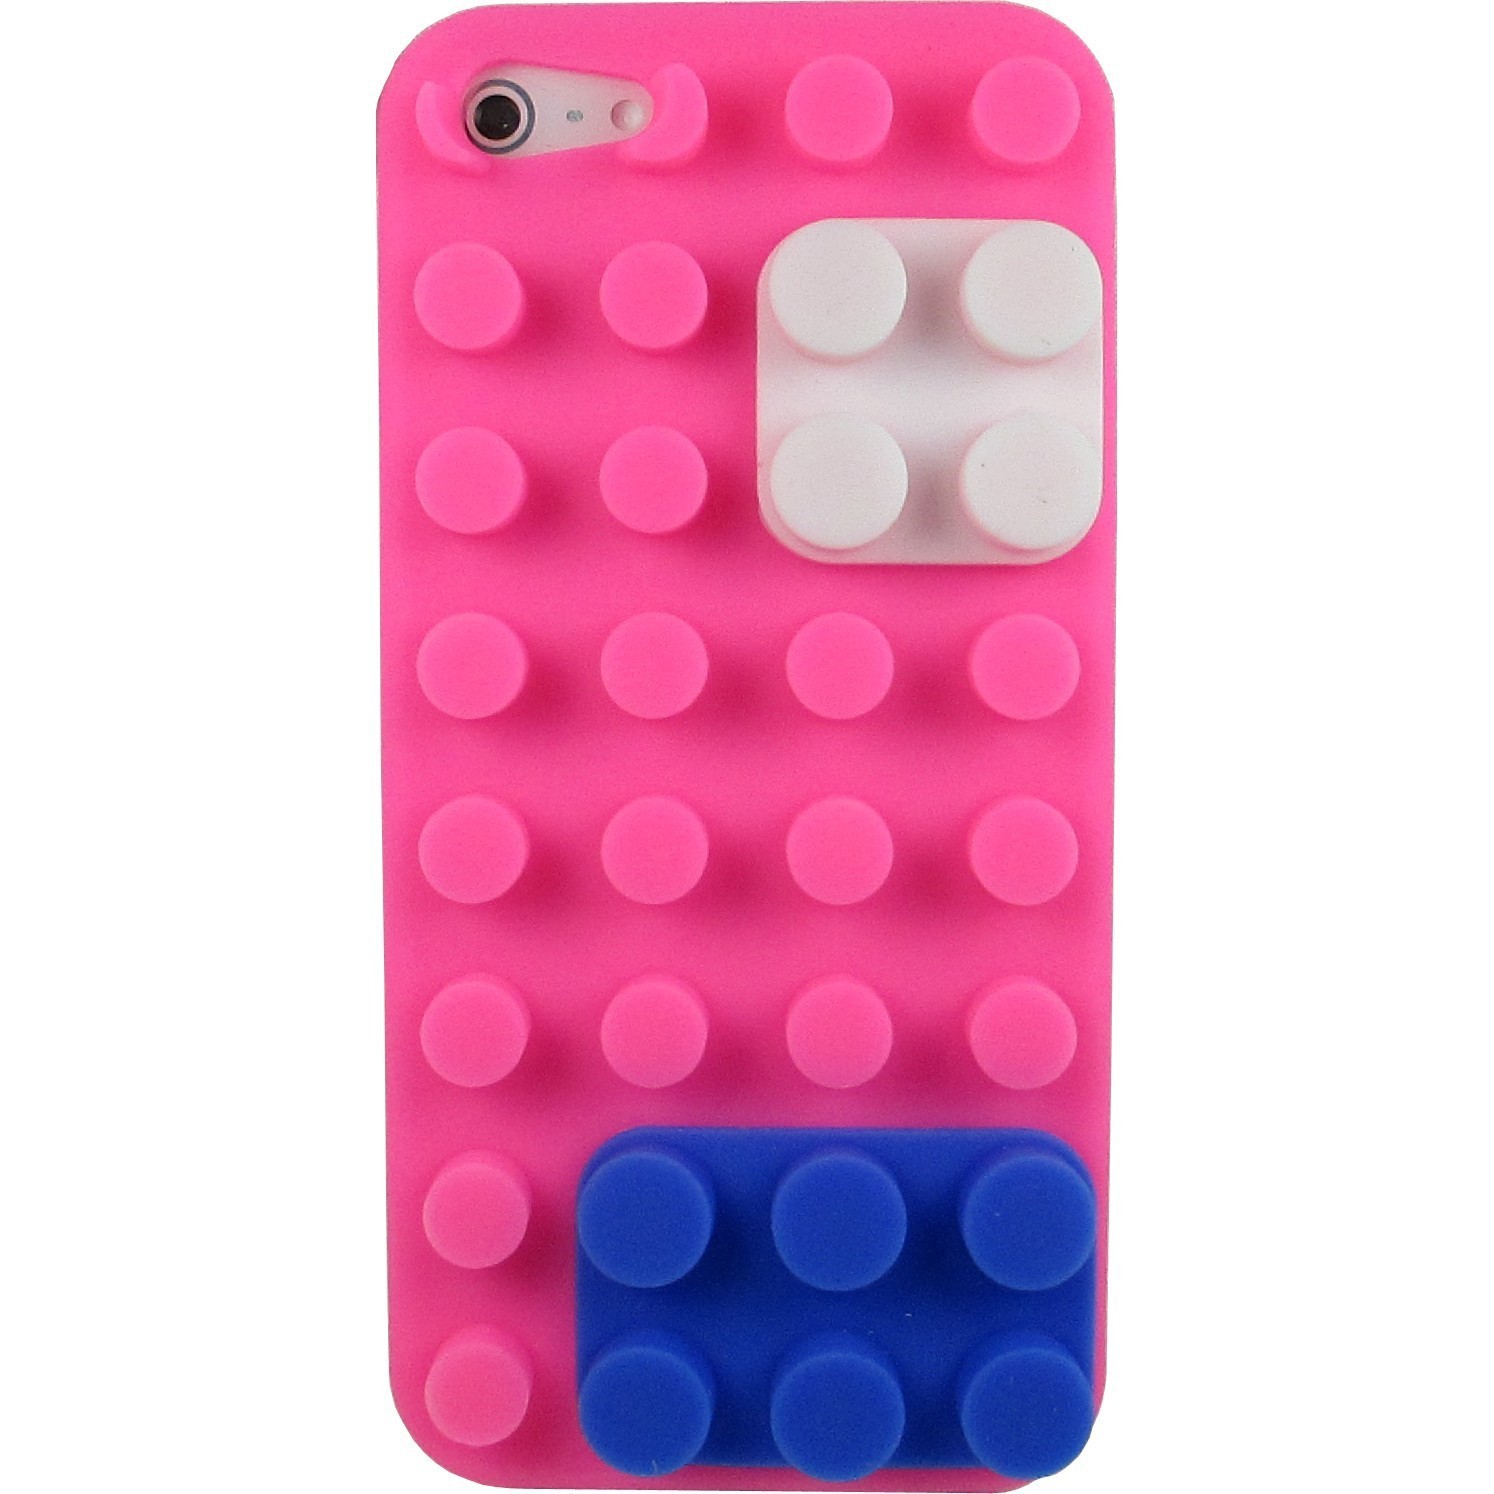 For iPhone 5 3D Lego Hot Pink Brick Building Block Silicone Case +  Protector - $5.99